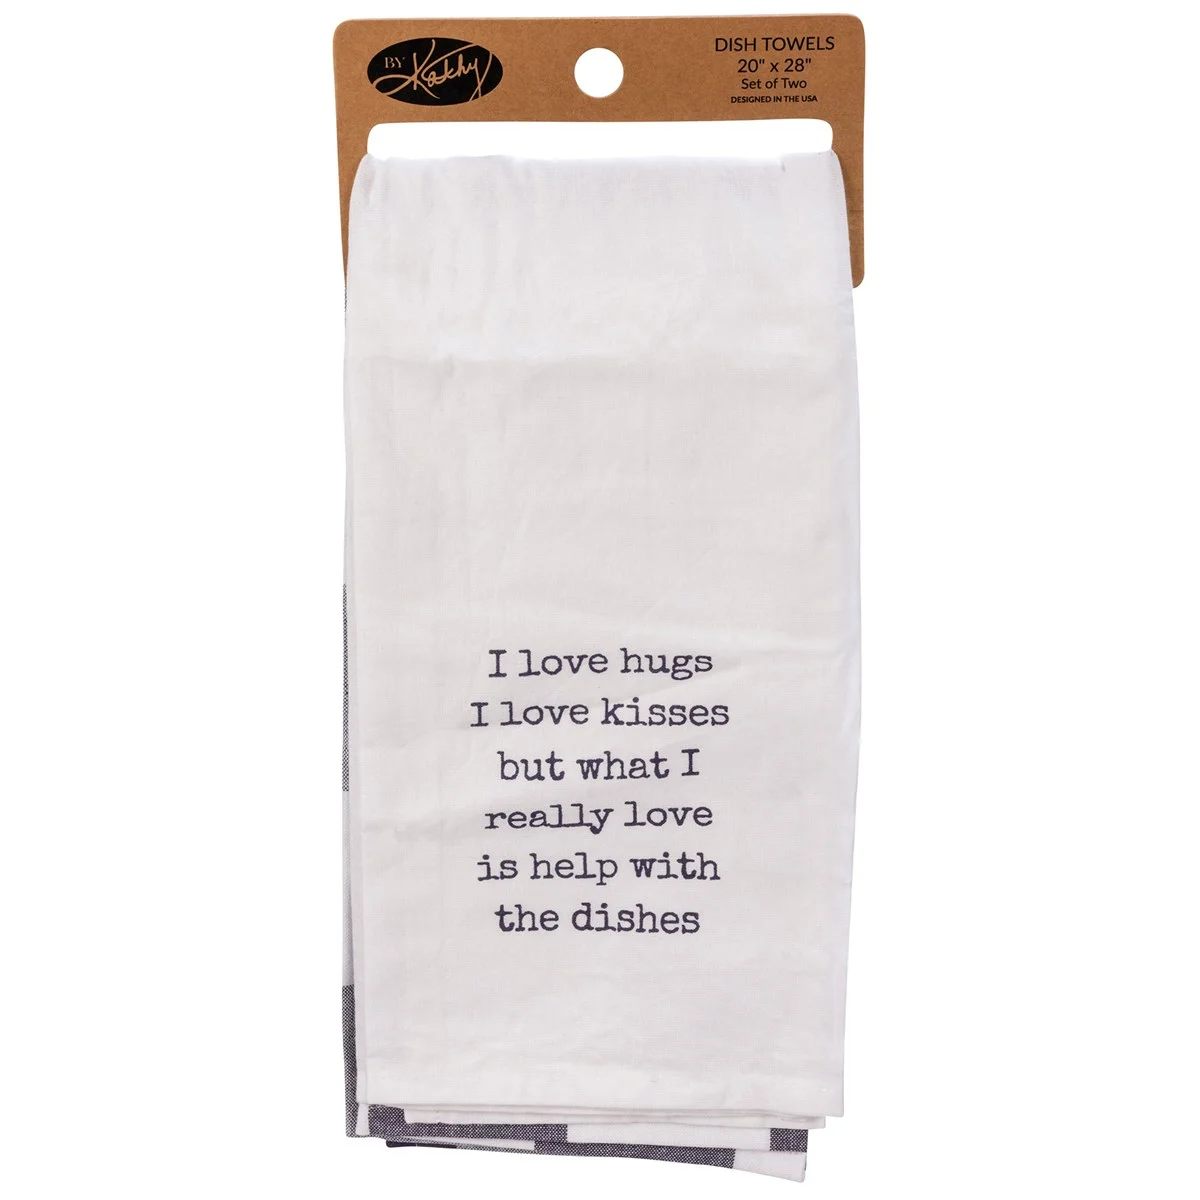 I Love Hugs and Kisses But Love Help With Dishes Towel Set of 2